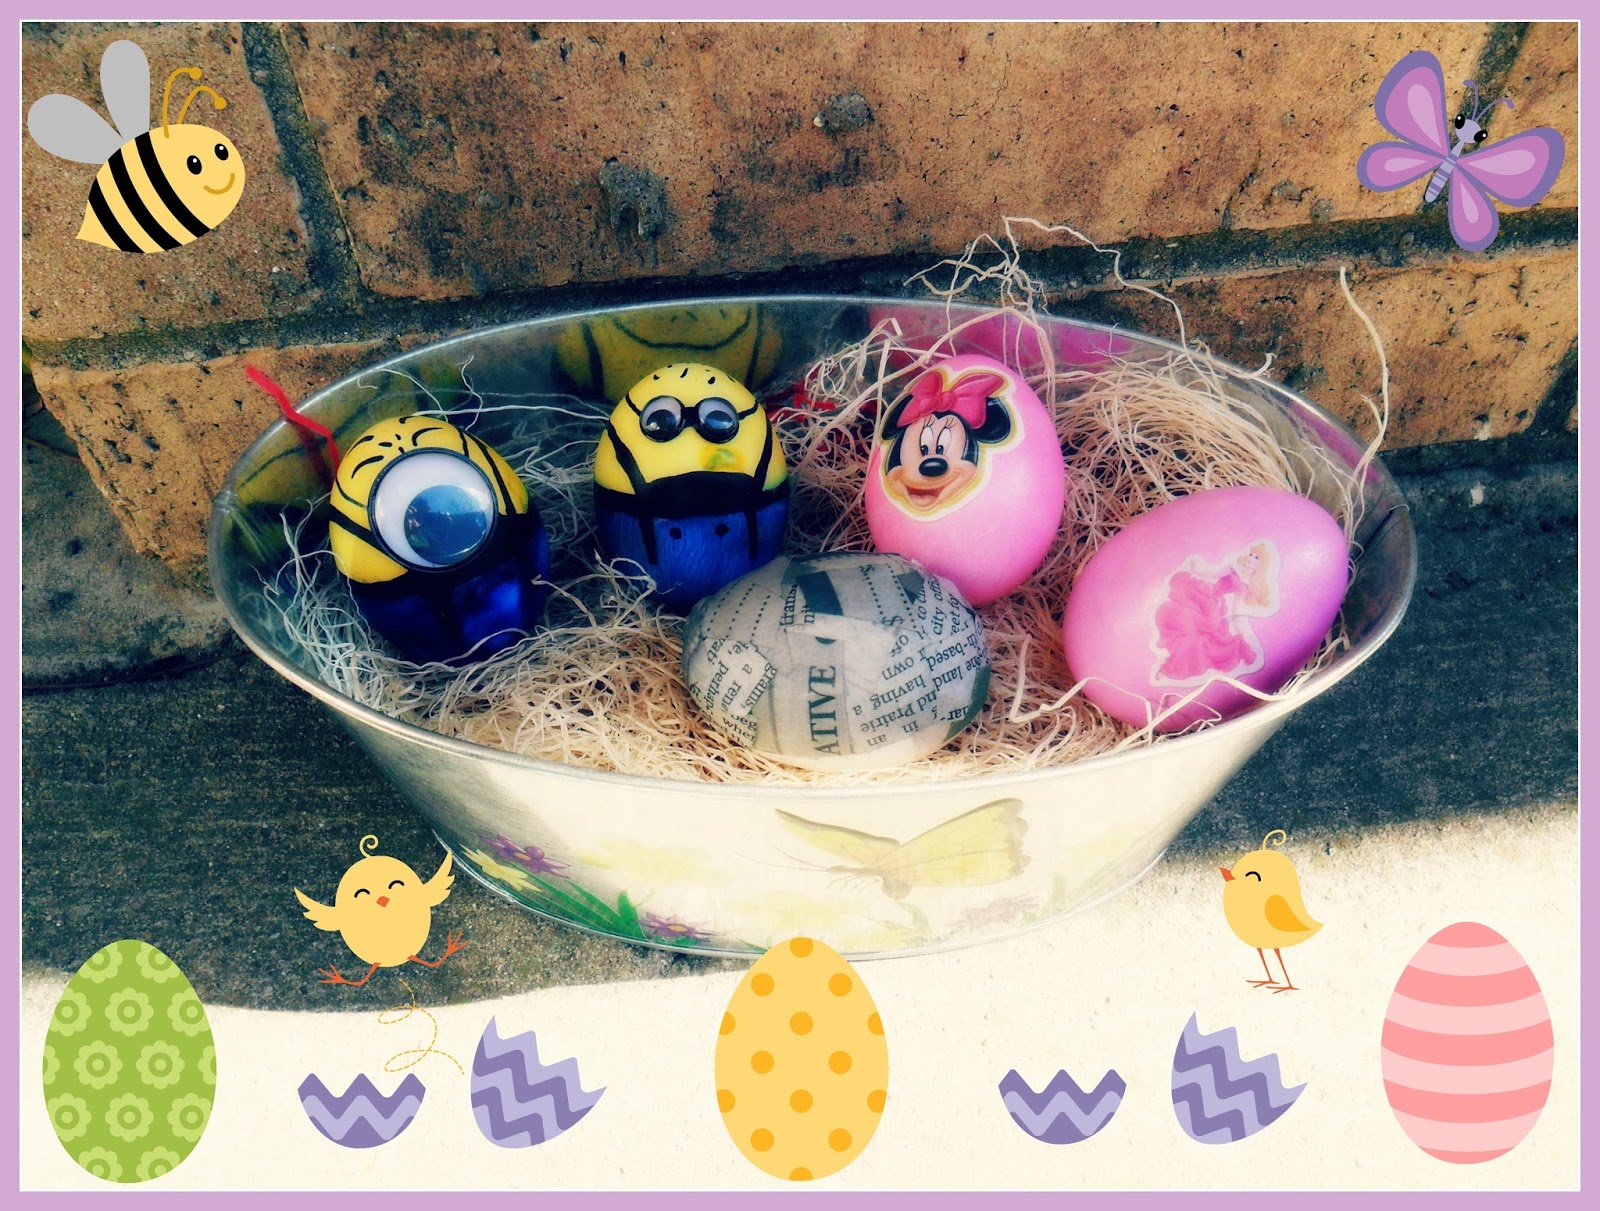 Family Fun and Easter Eggs crafting! (Tutorial)